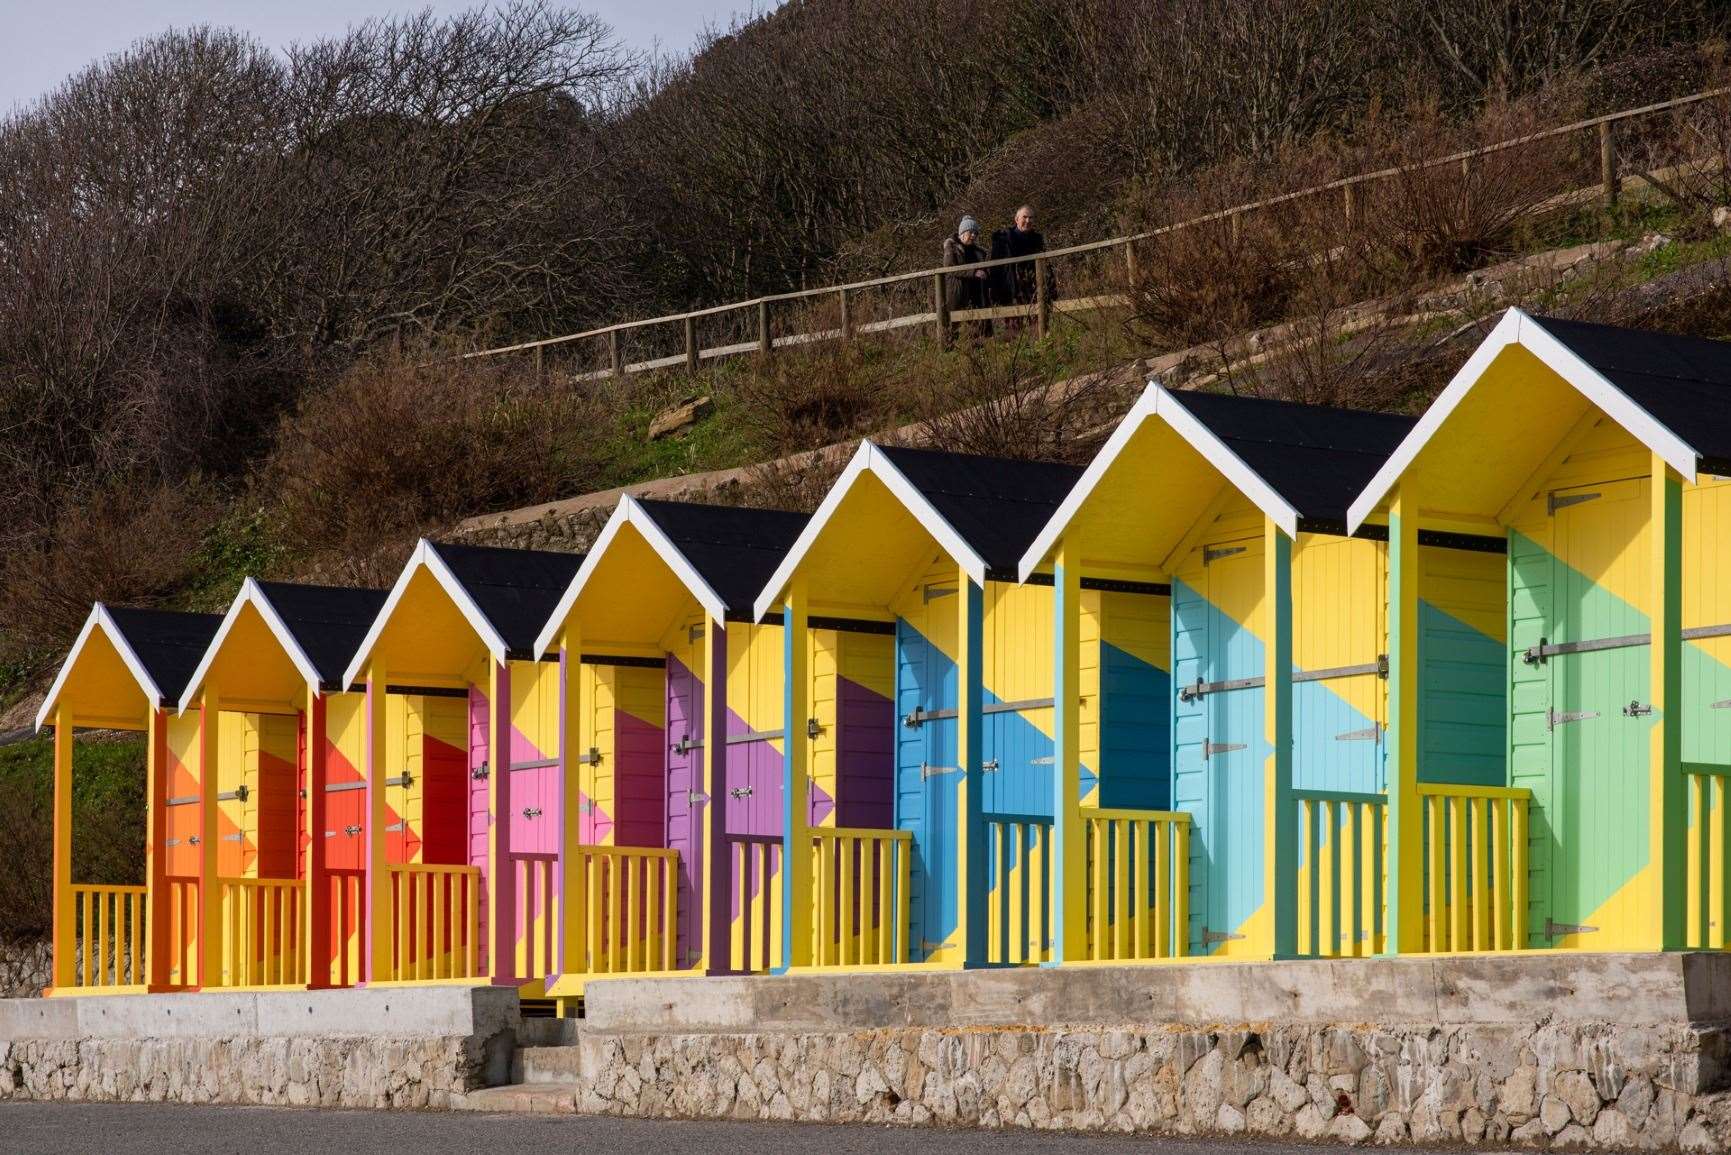 Folkestone's new beach huts. Picture: @thierry_bal on Instagram